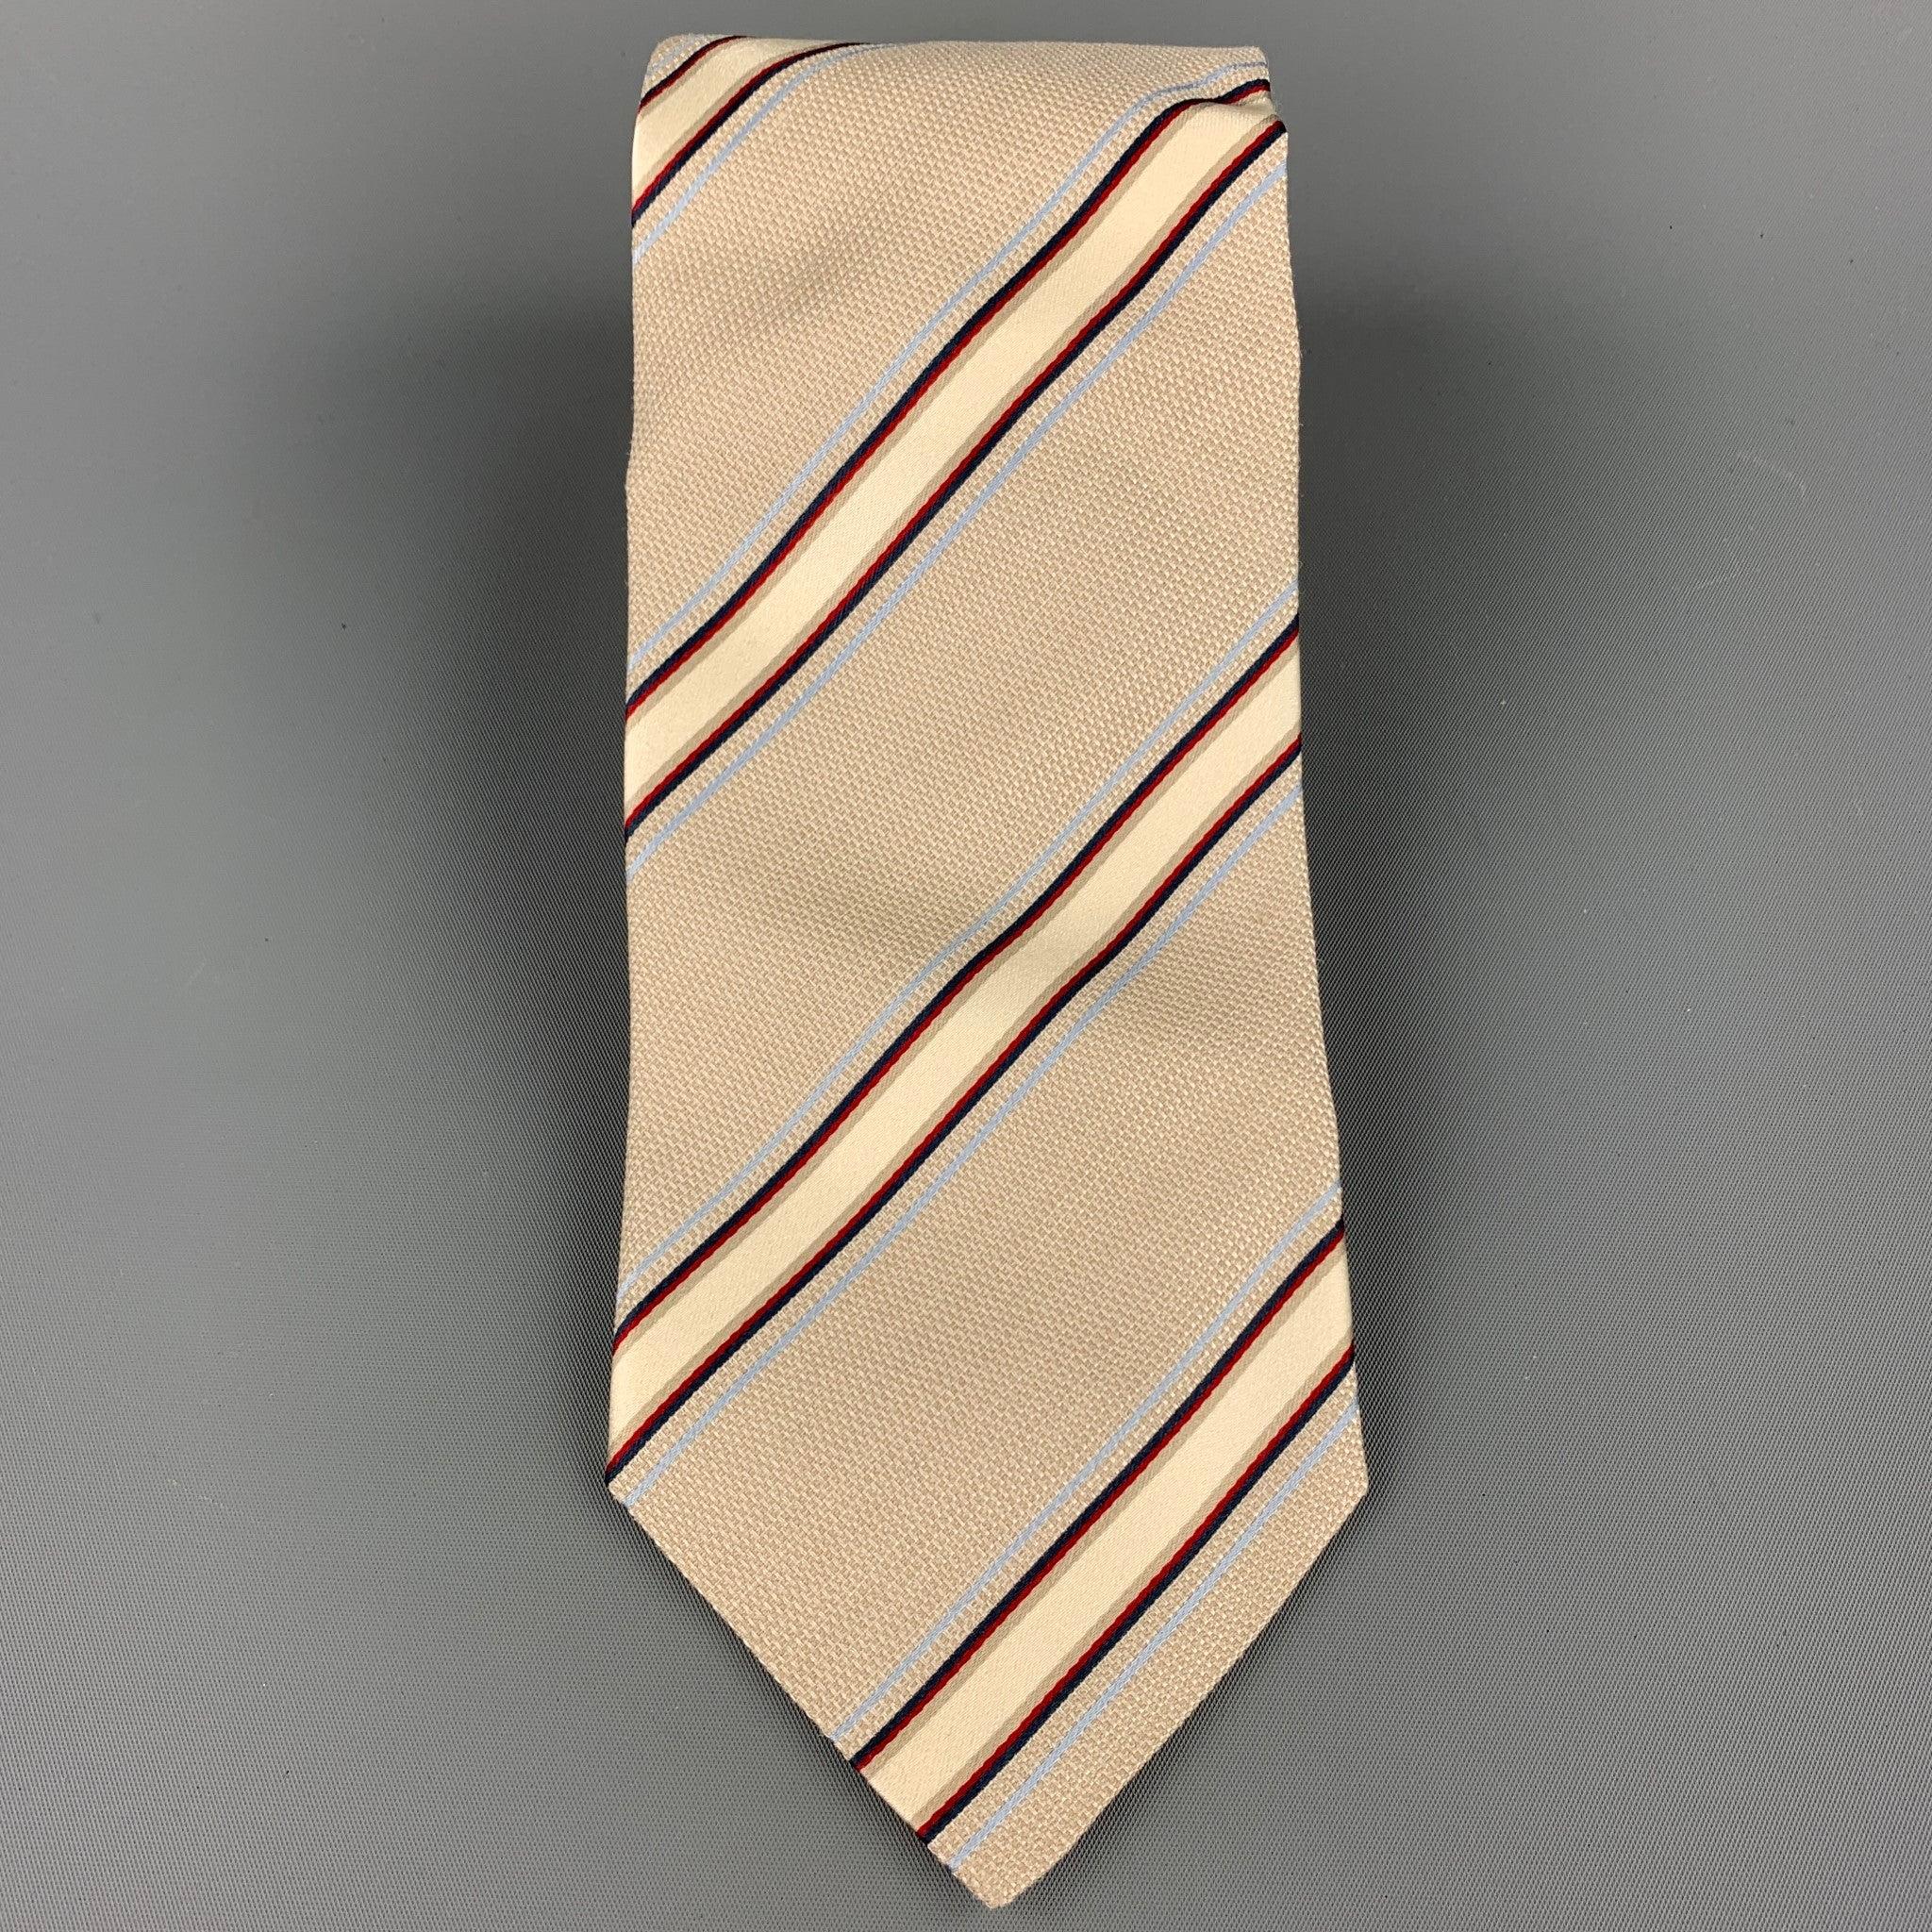 ERMENEGILDO ZEGNA tie comes in a beige & navy diagonal stripe silk. Made in Italy.Very Good Pre-Owned Condition.Width: 4 inches 
  
  
 
Reference: 107881
Category: Tie
More Details
    
Brand:  ERMENEGILDO ZEGNA
Color:  Beige
Color 2: 